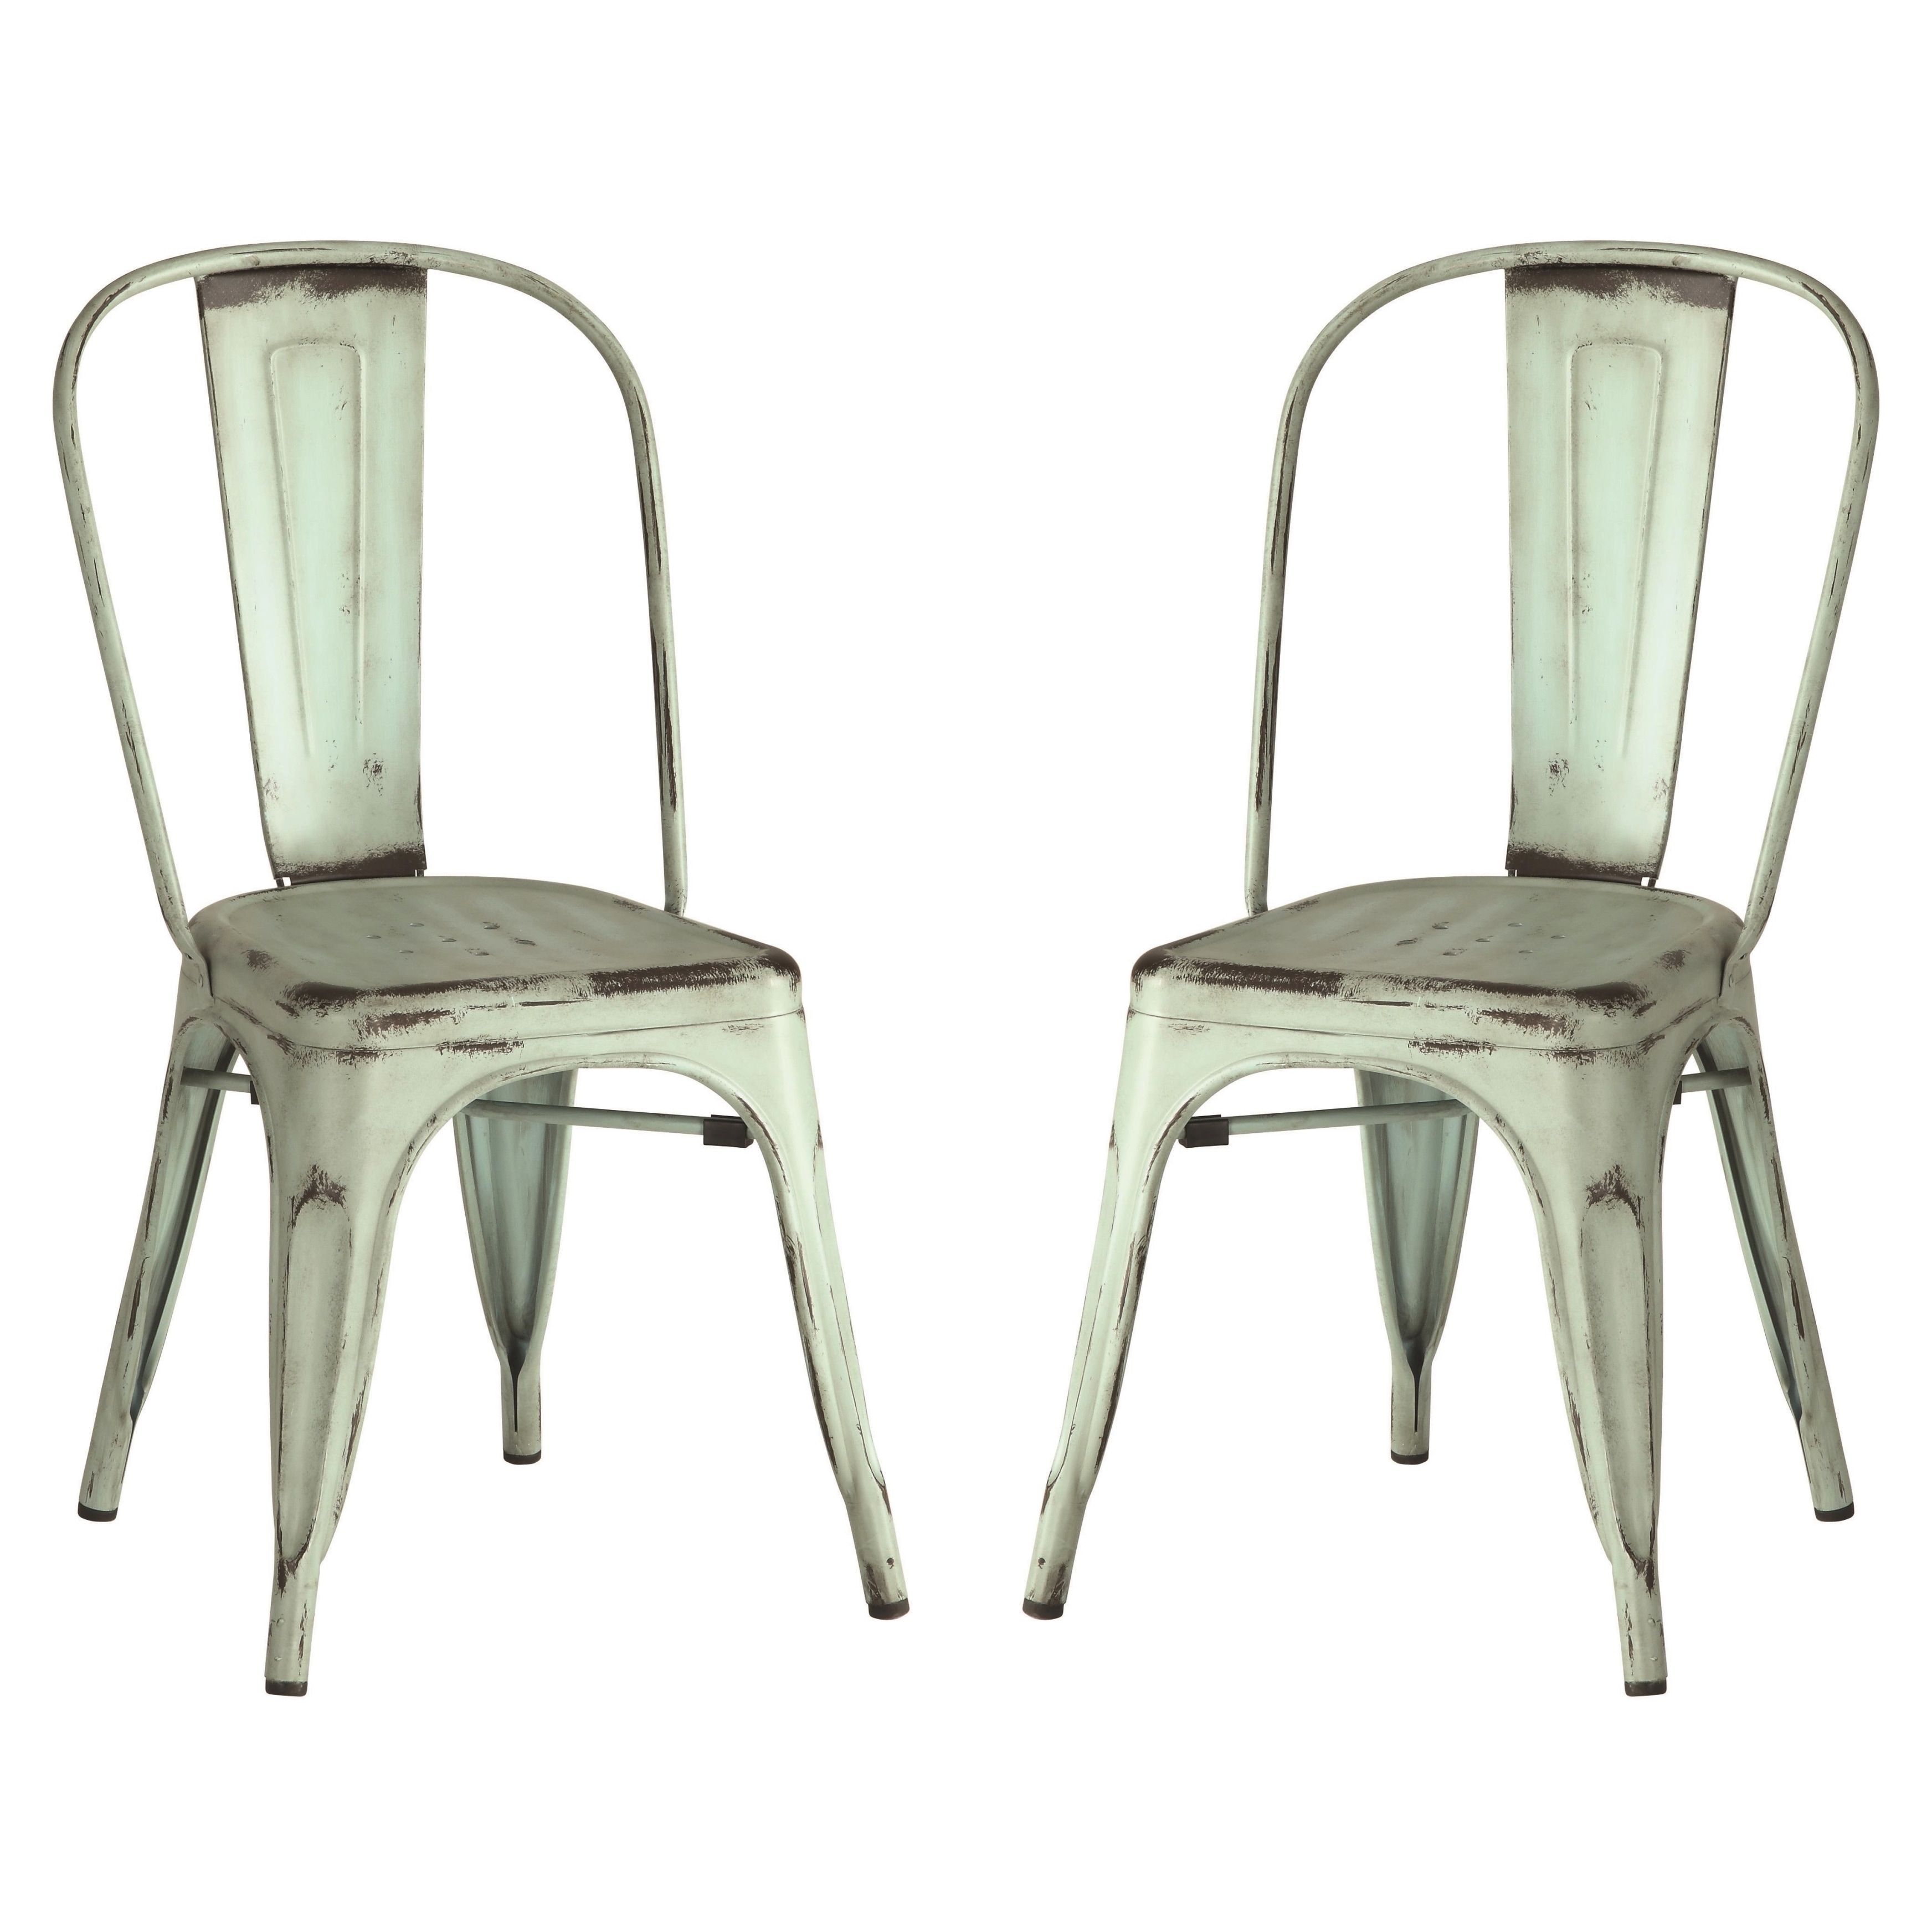 Vintage Distressed Rustic Metal Dining Chairs Set Of 4 Overstock 10789566